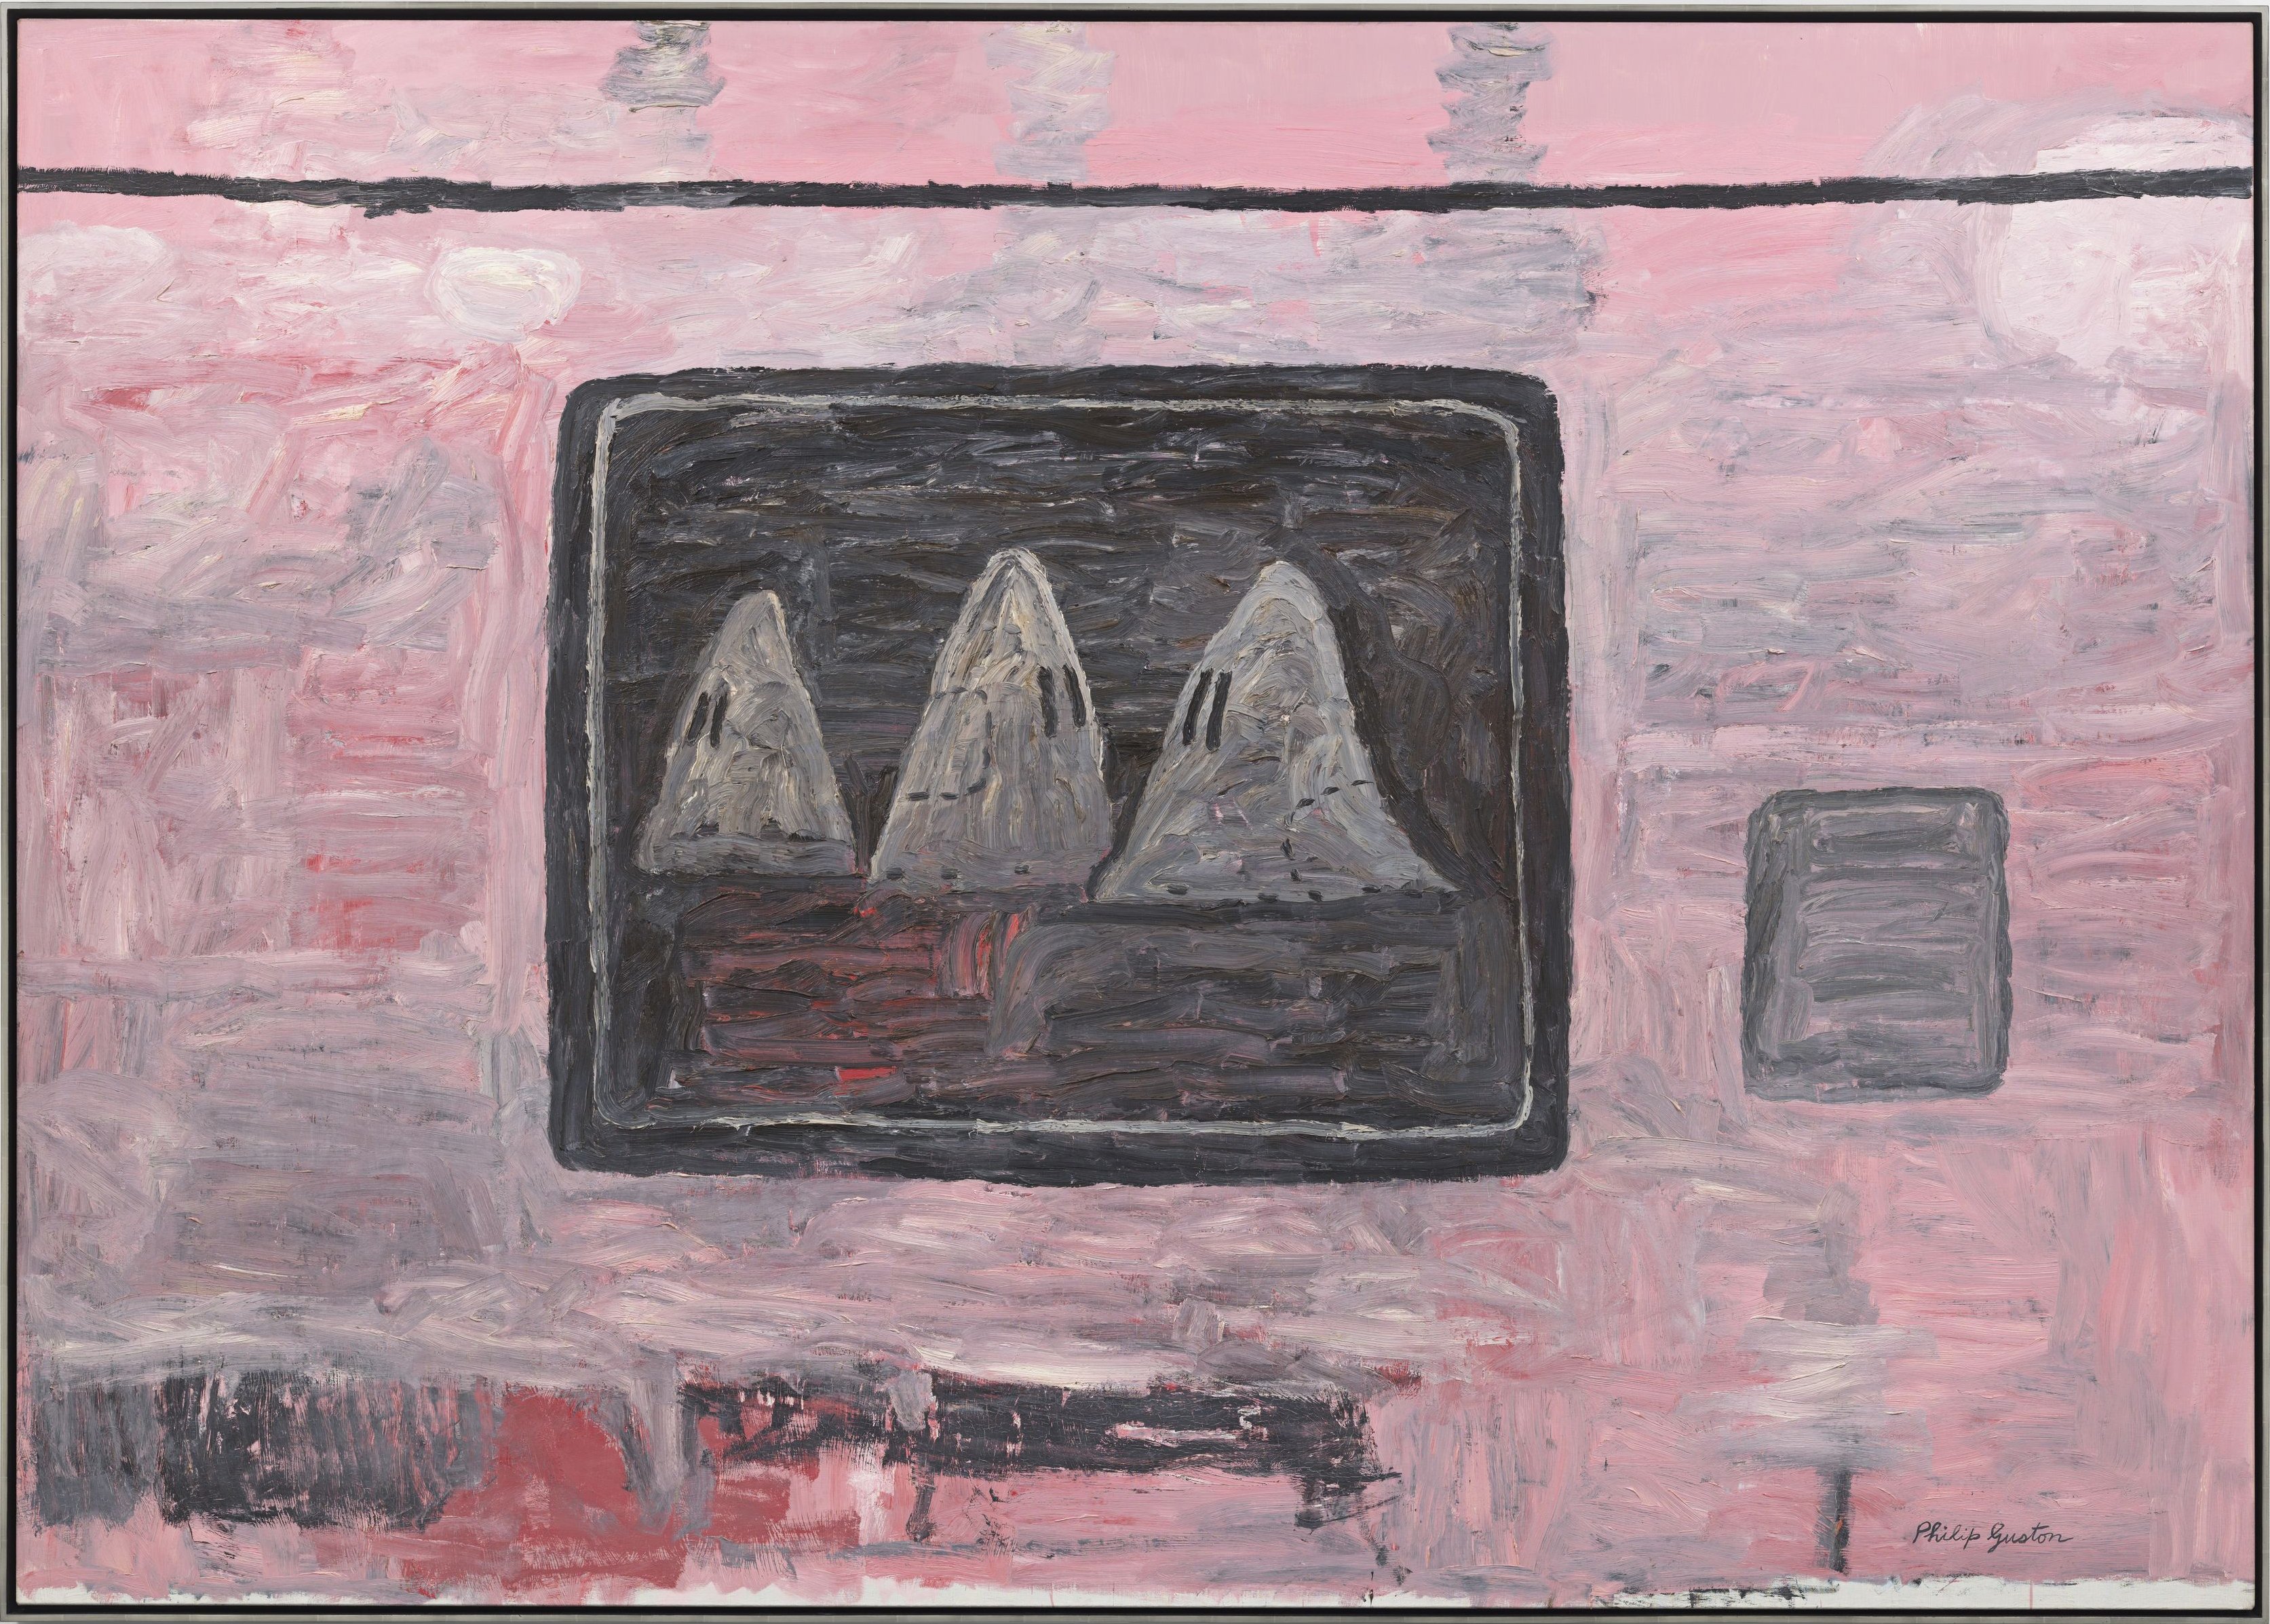 Philip Guston, <em>Blackboard</em> (1969). ©The Estate of Philip Guston. Photo by Genevieve Hanson, courtesy the Estate and Hauser & Wirth, private collection.